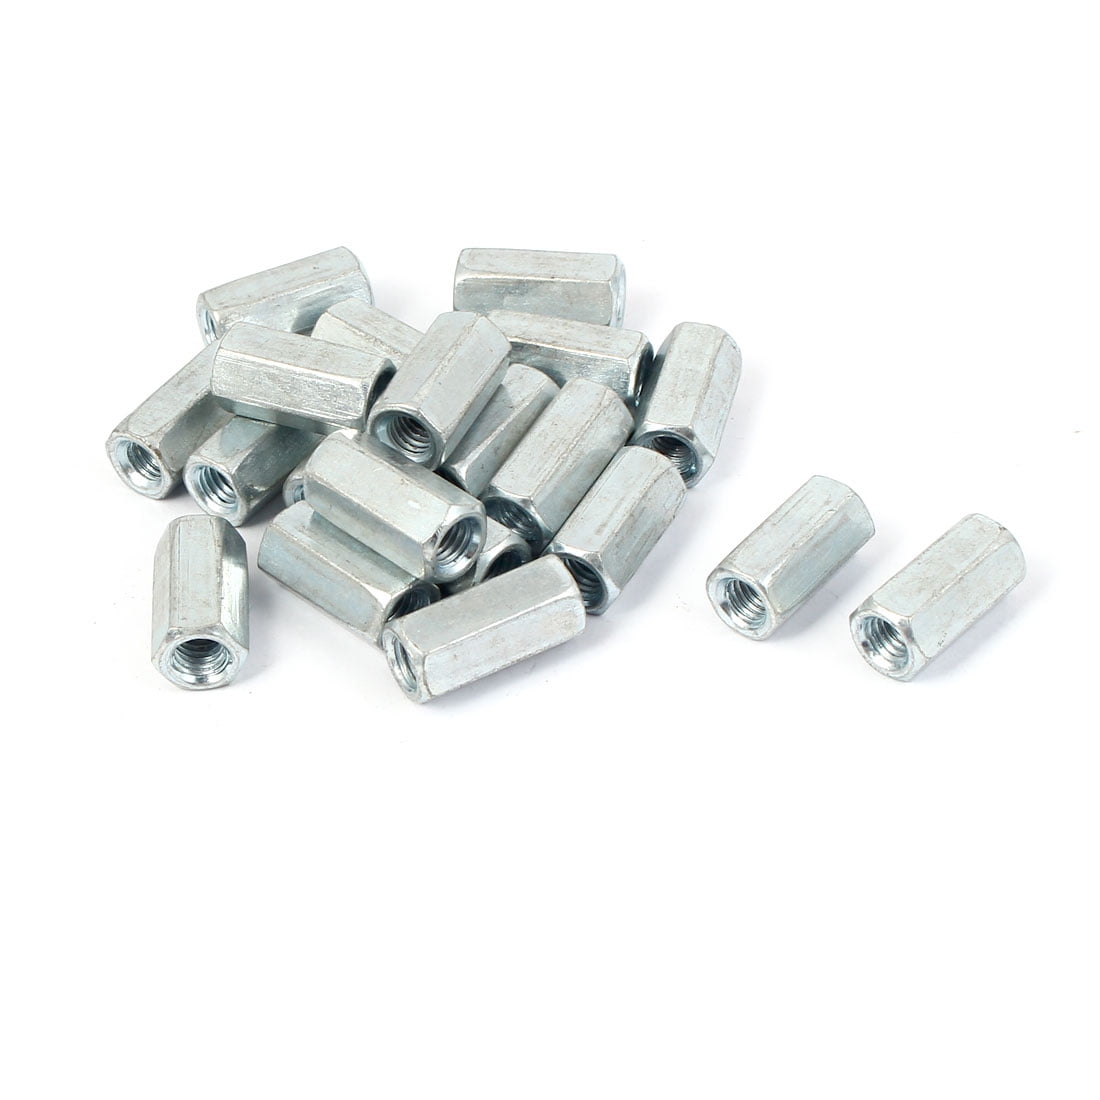 5 x Metric Hexagon 10mm Connector Long Nuts for Connecting Screwed Rod Bars